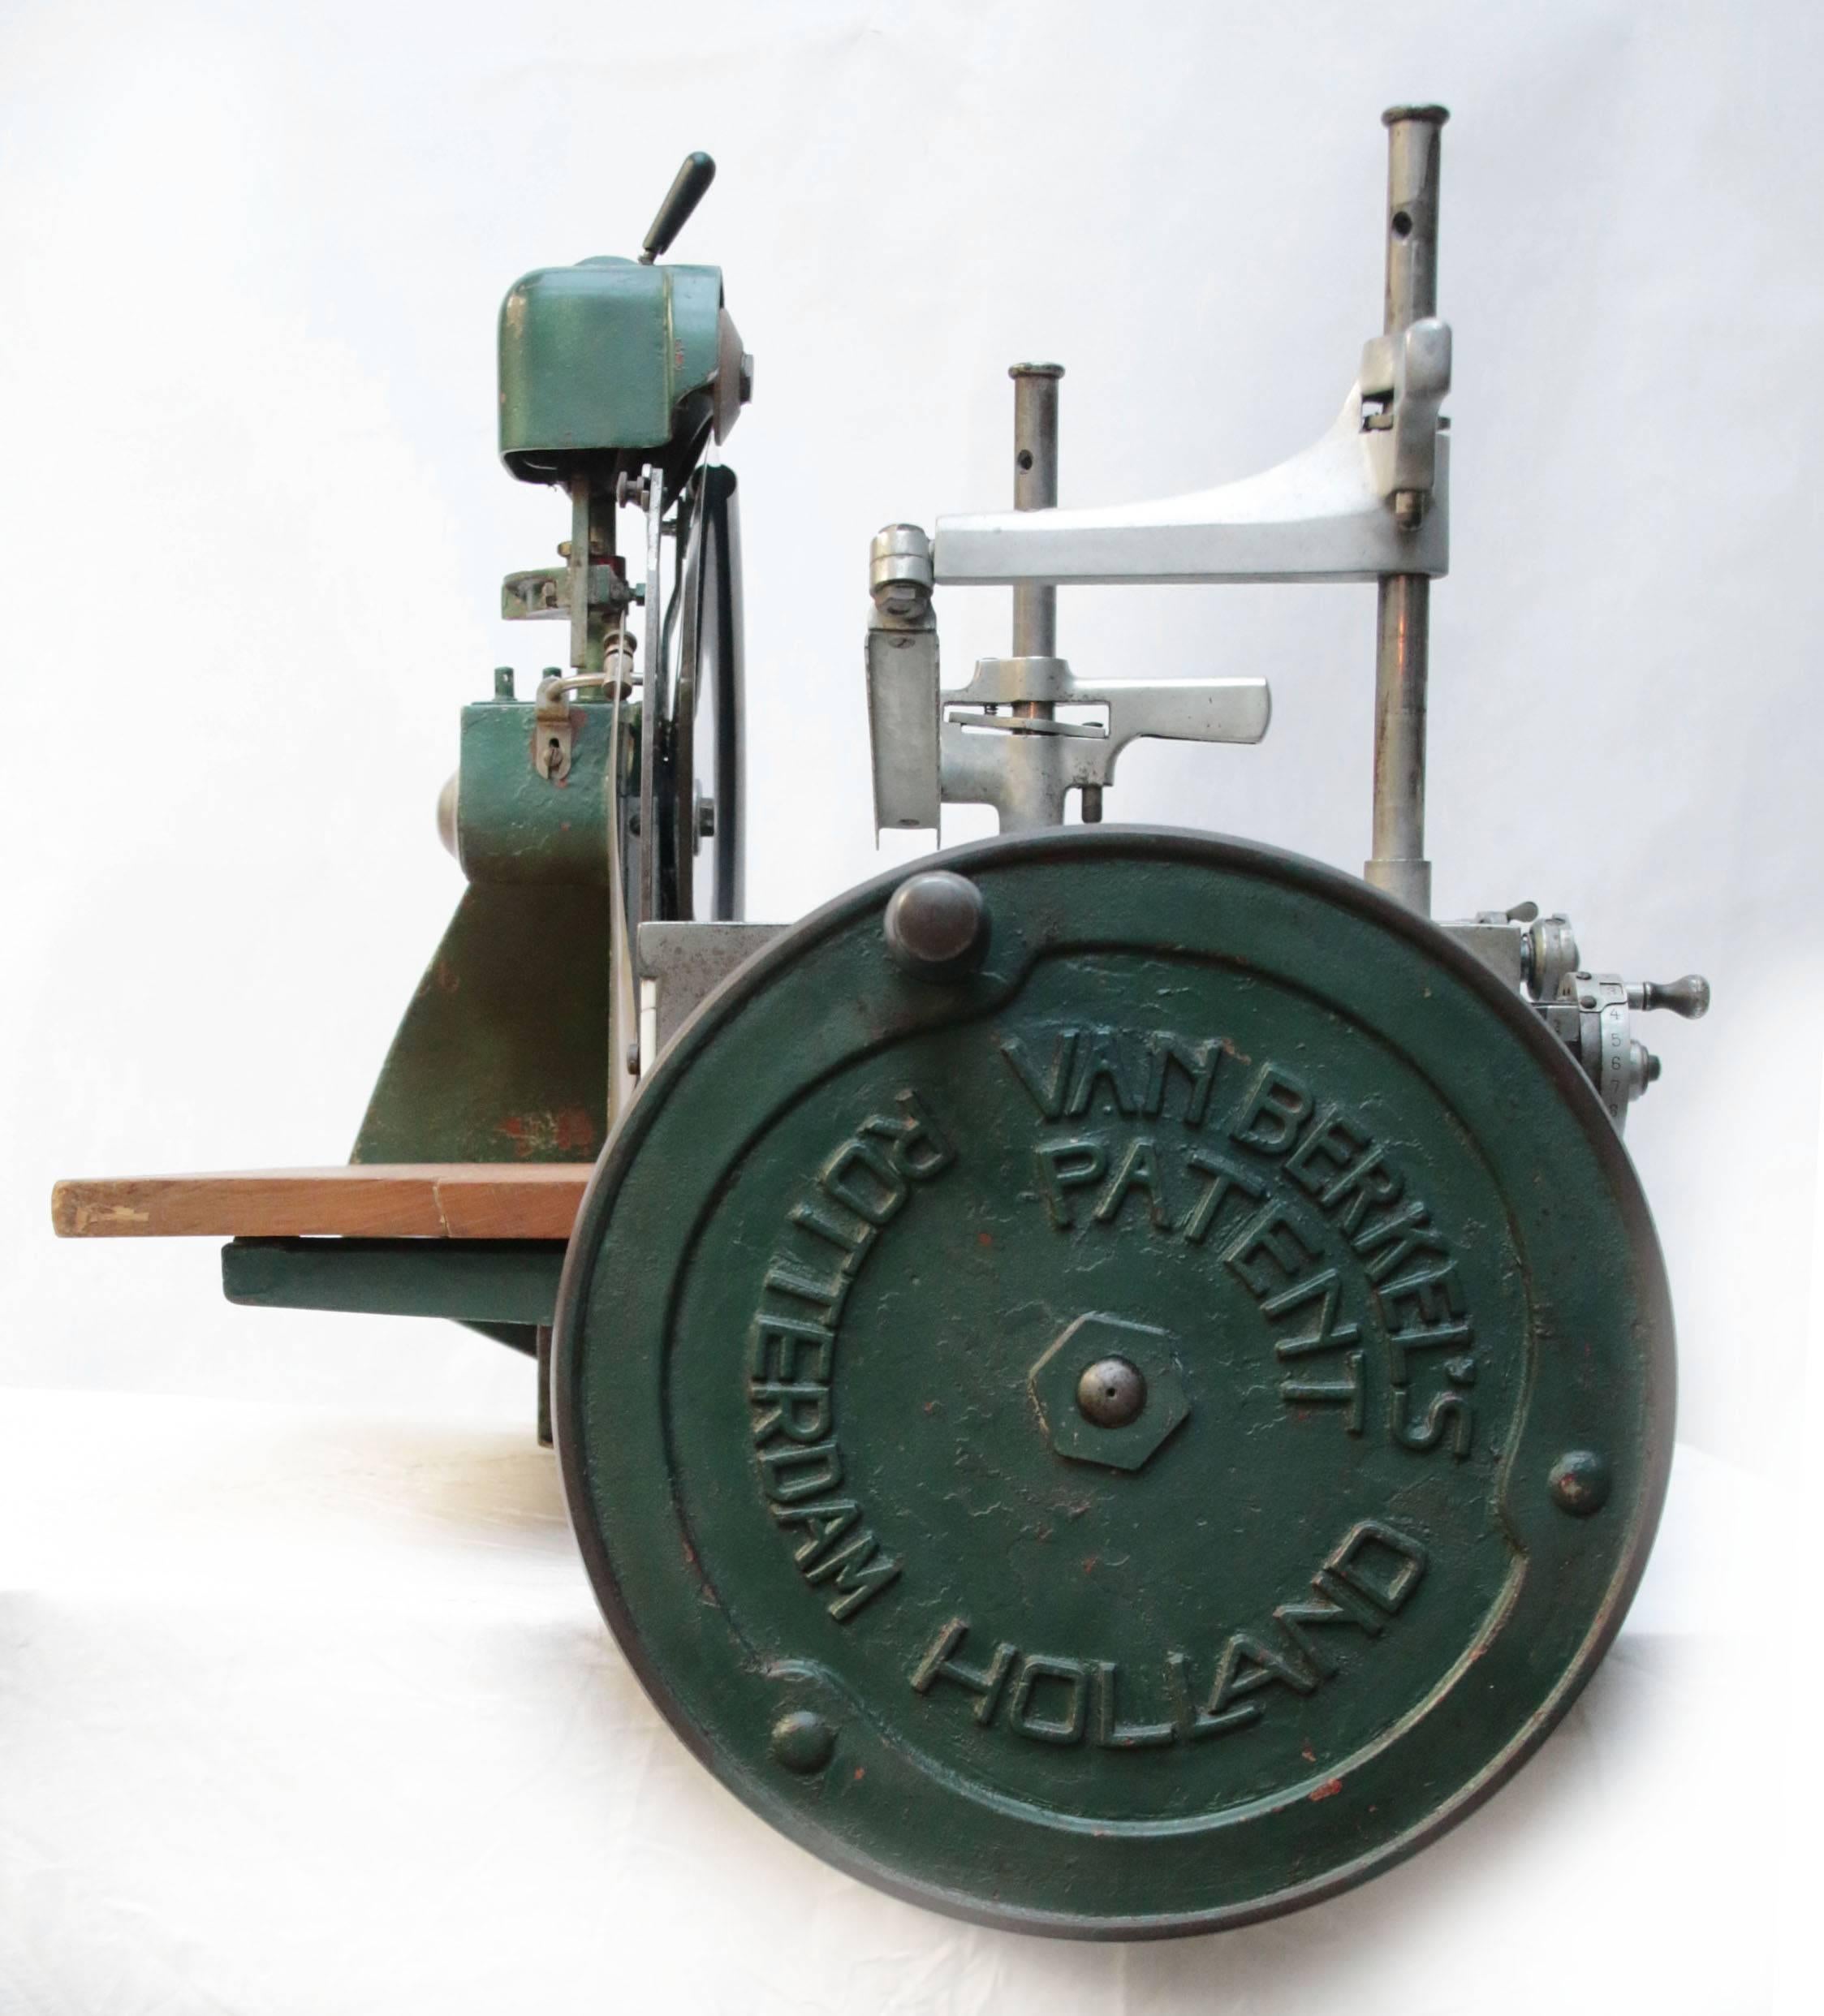 Very rare army green berkel model five meat slicing machine, 1922-1928. Used in WO II military field kitchen. Rare model with a special historical value.

The meat slicer Berkel model five was built in the period between 1922 and 1928. The Slicer